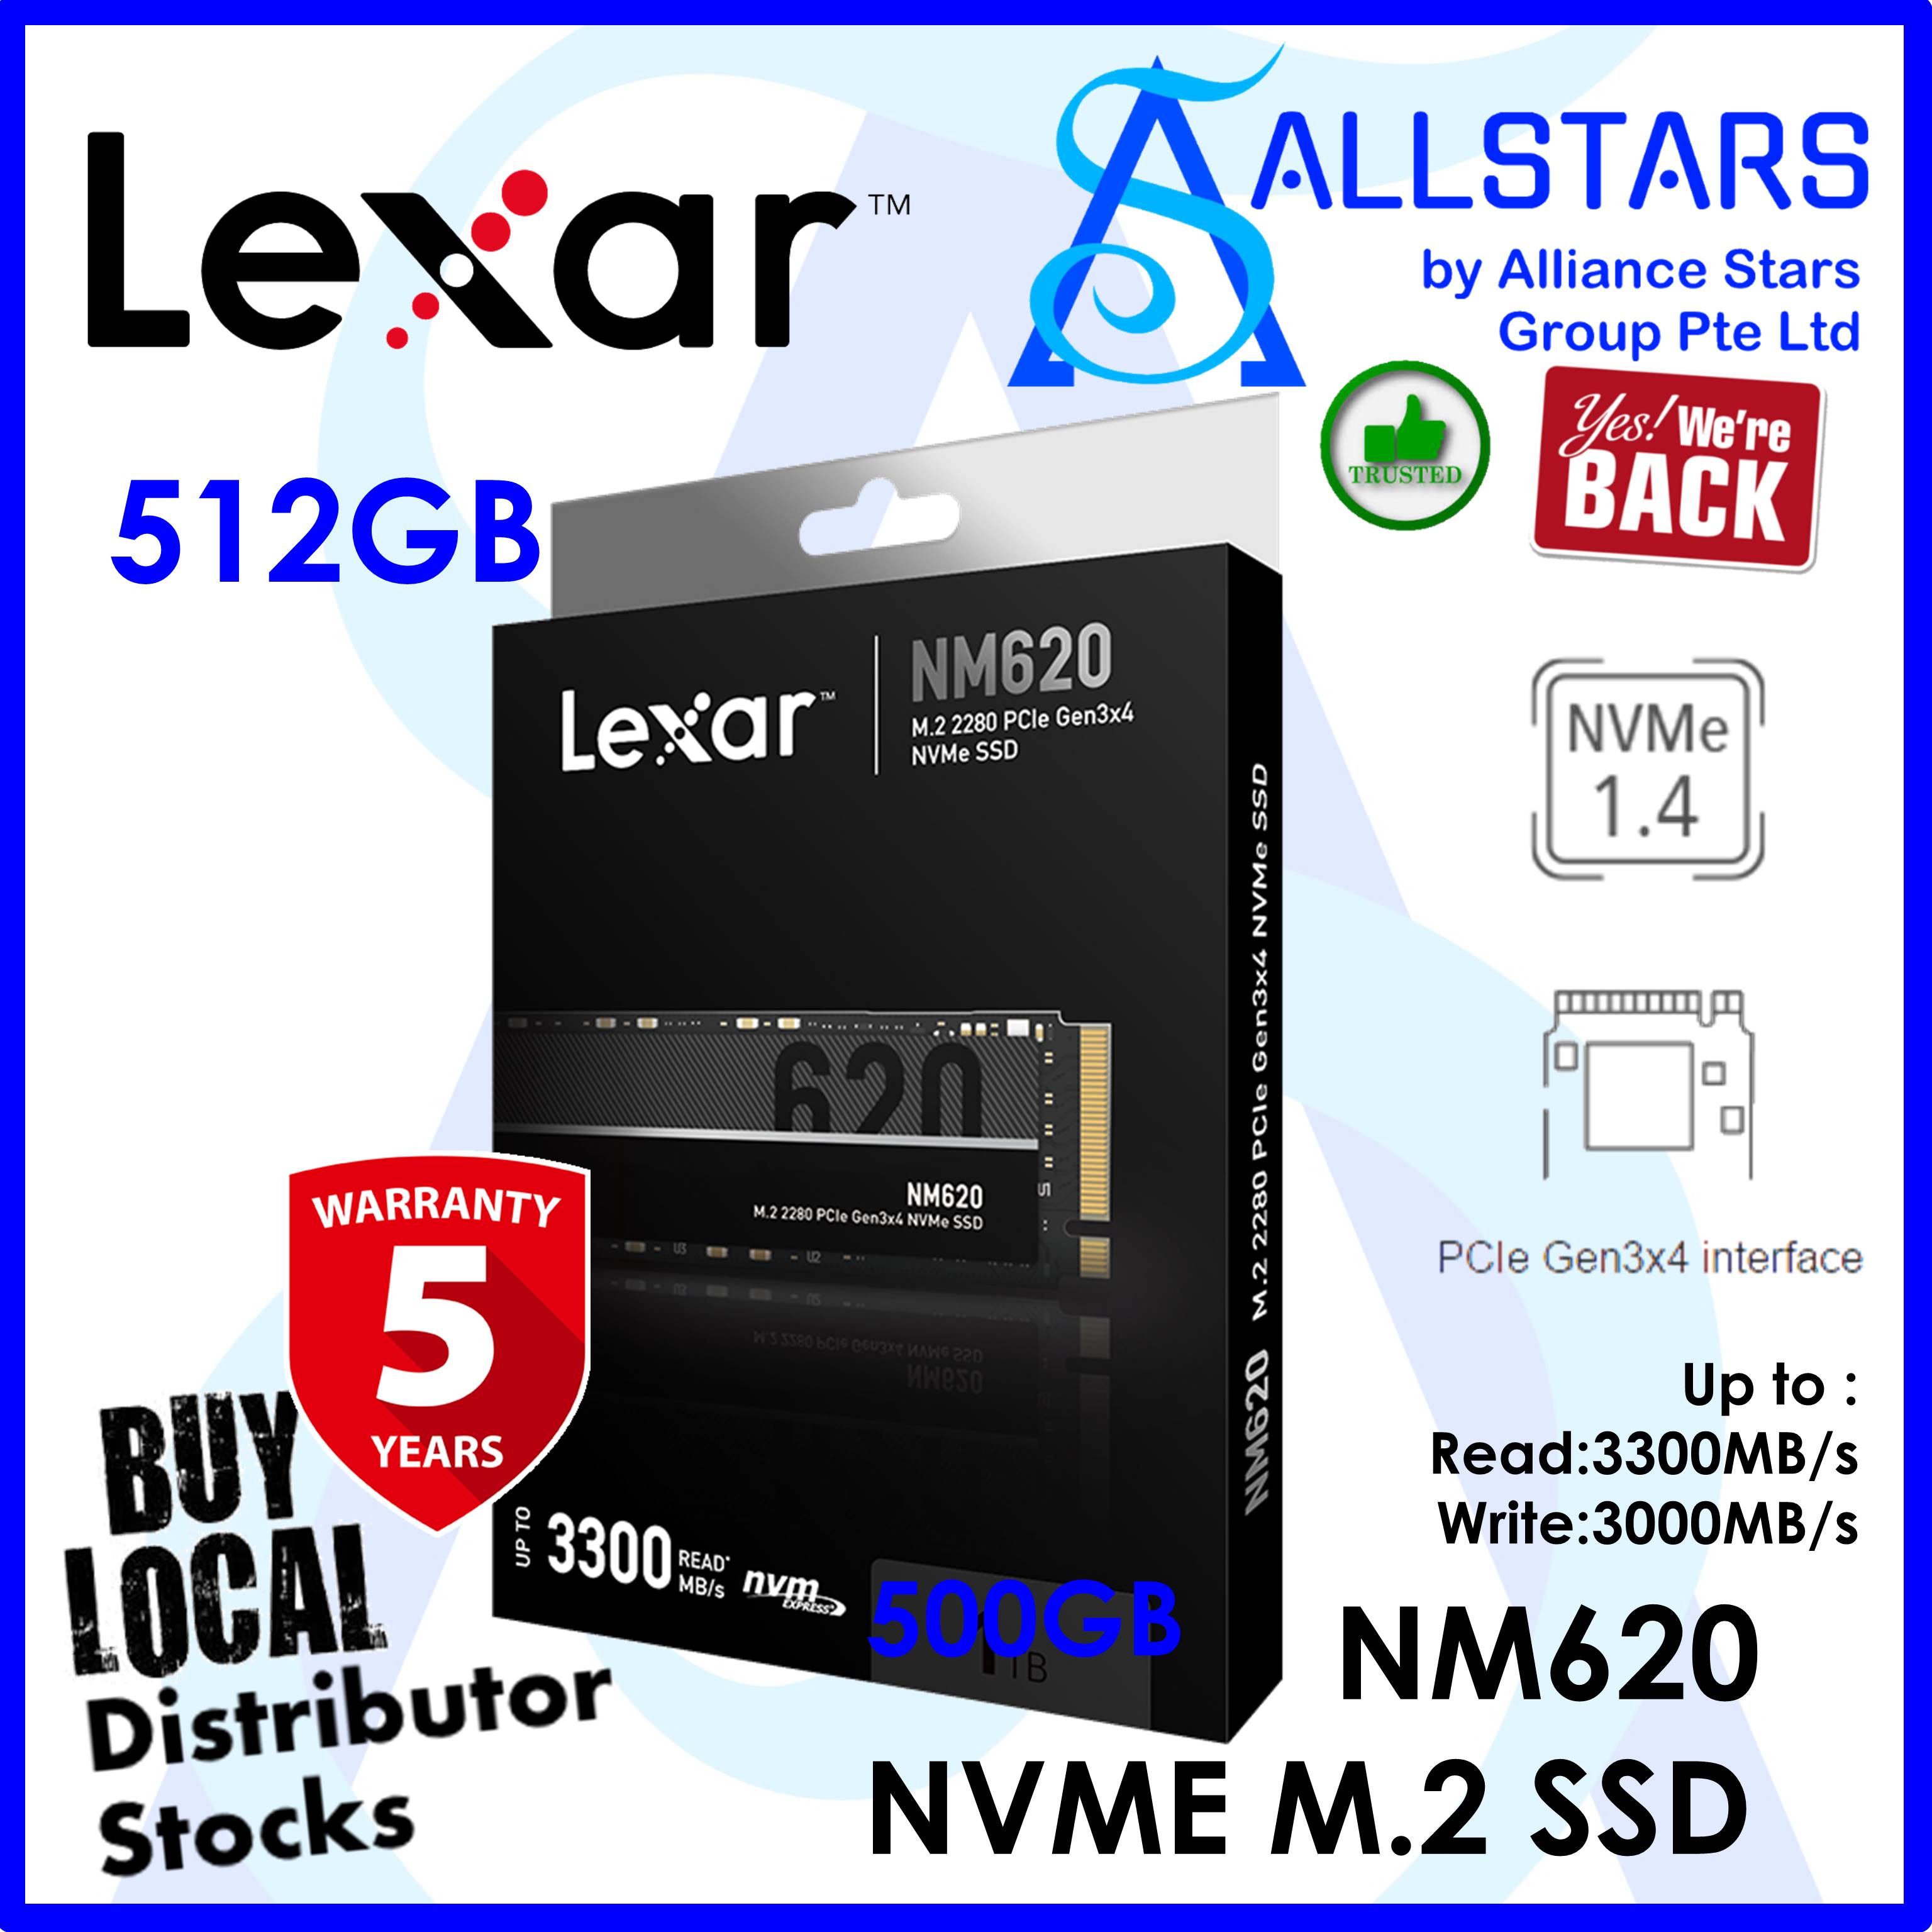 ALLSTARS : WE ARE BACK / Most Popular SSD PROMO) *FREE UPGRADE to